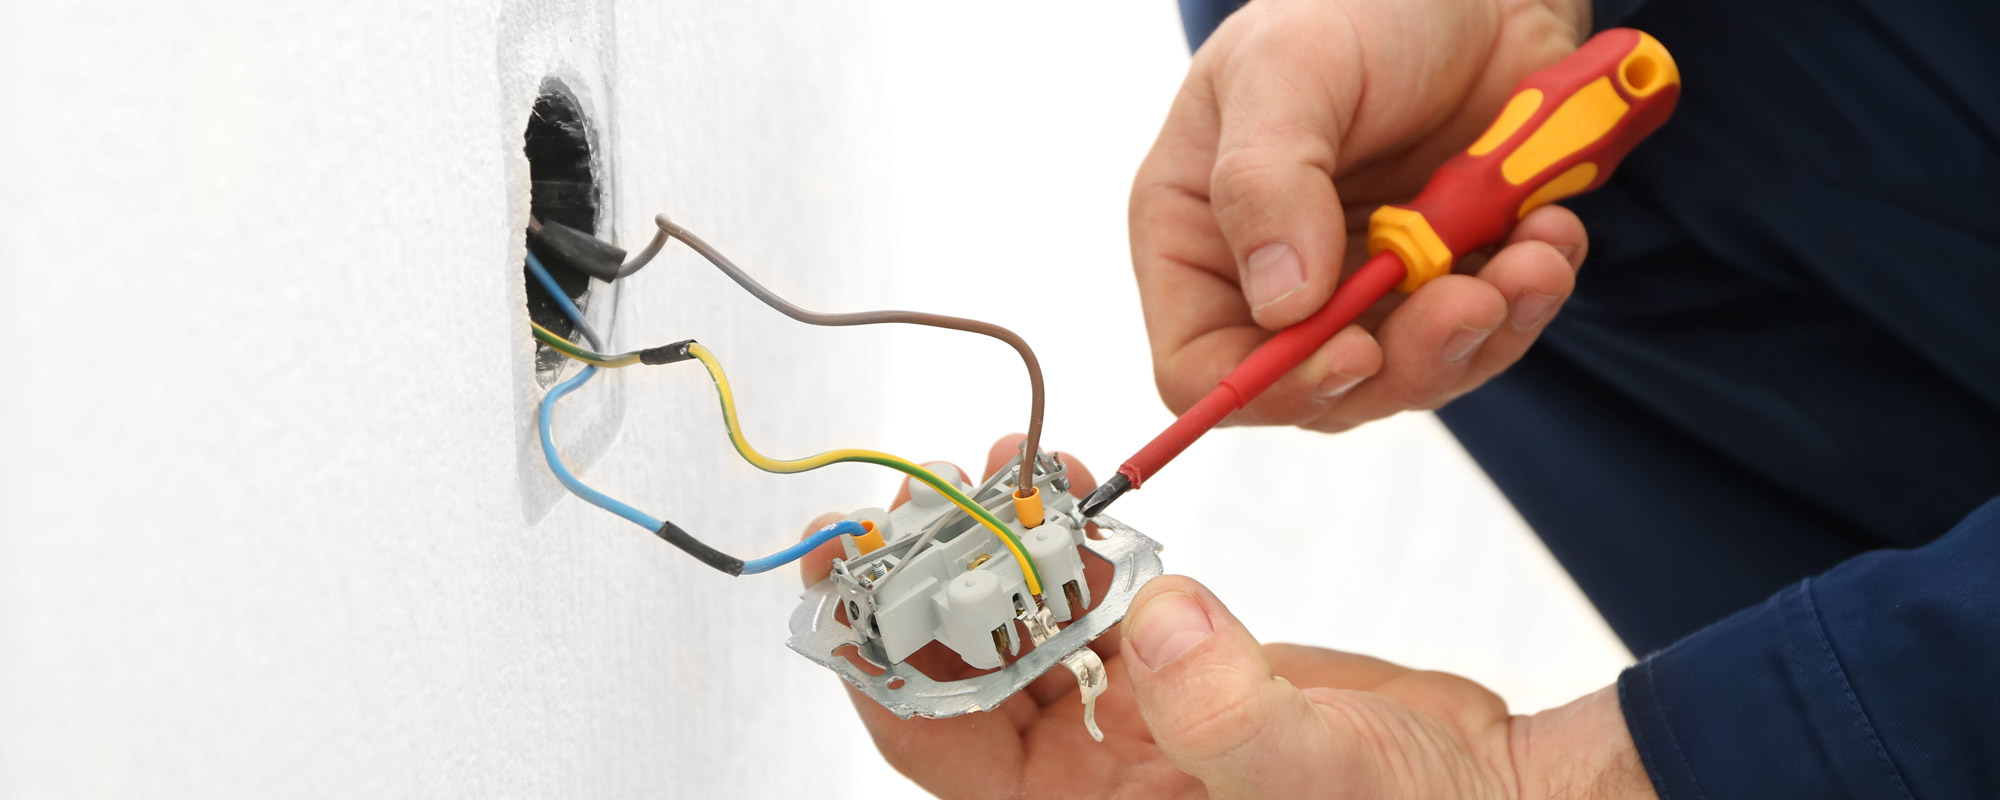 electric outlet troubleshooting